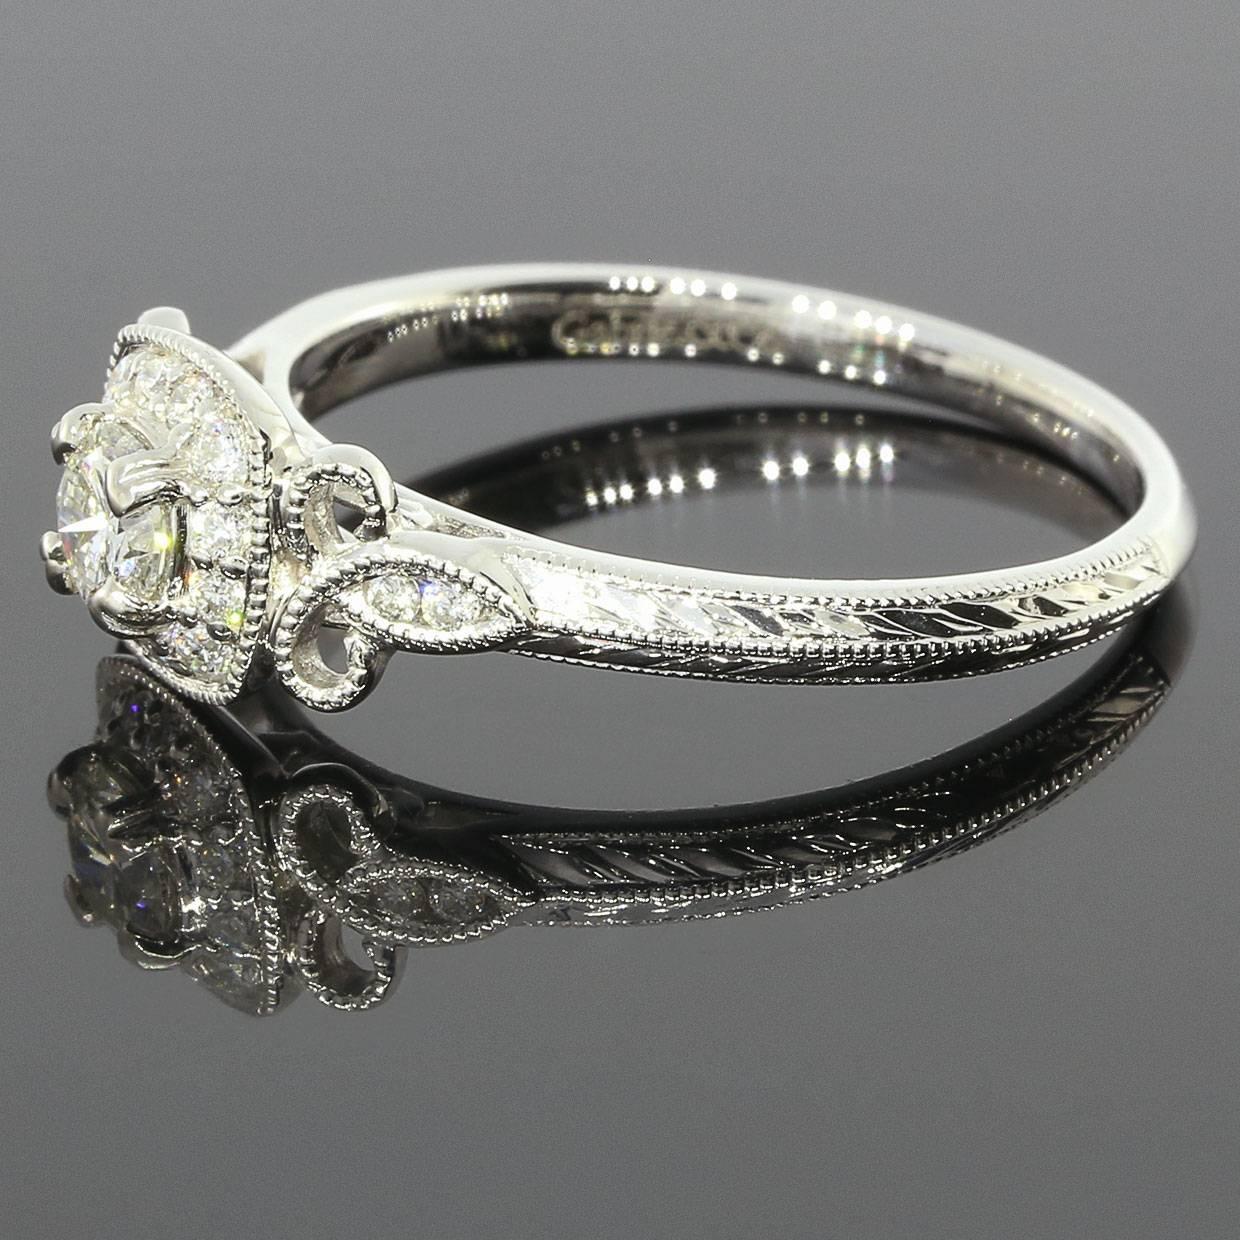 This beautiful ring features .38 carat of sparkly, round brilliant diamonds. The center diamond is a .26 carat round brilliant diamond that grades as I/SI1 in quality. This scintillating diamond is prong set in a cushion shaped, diamond halo with